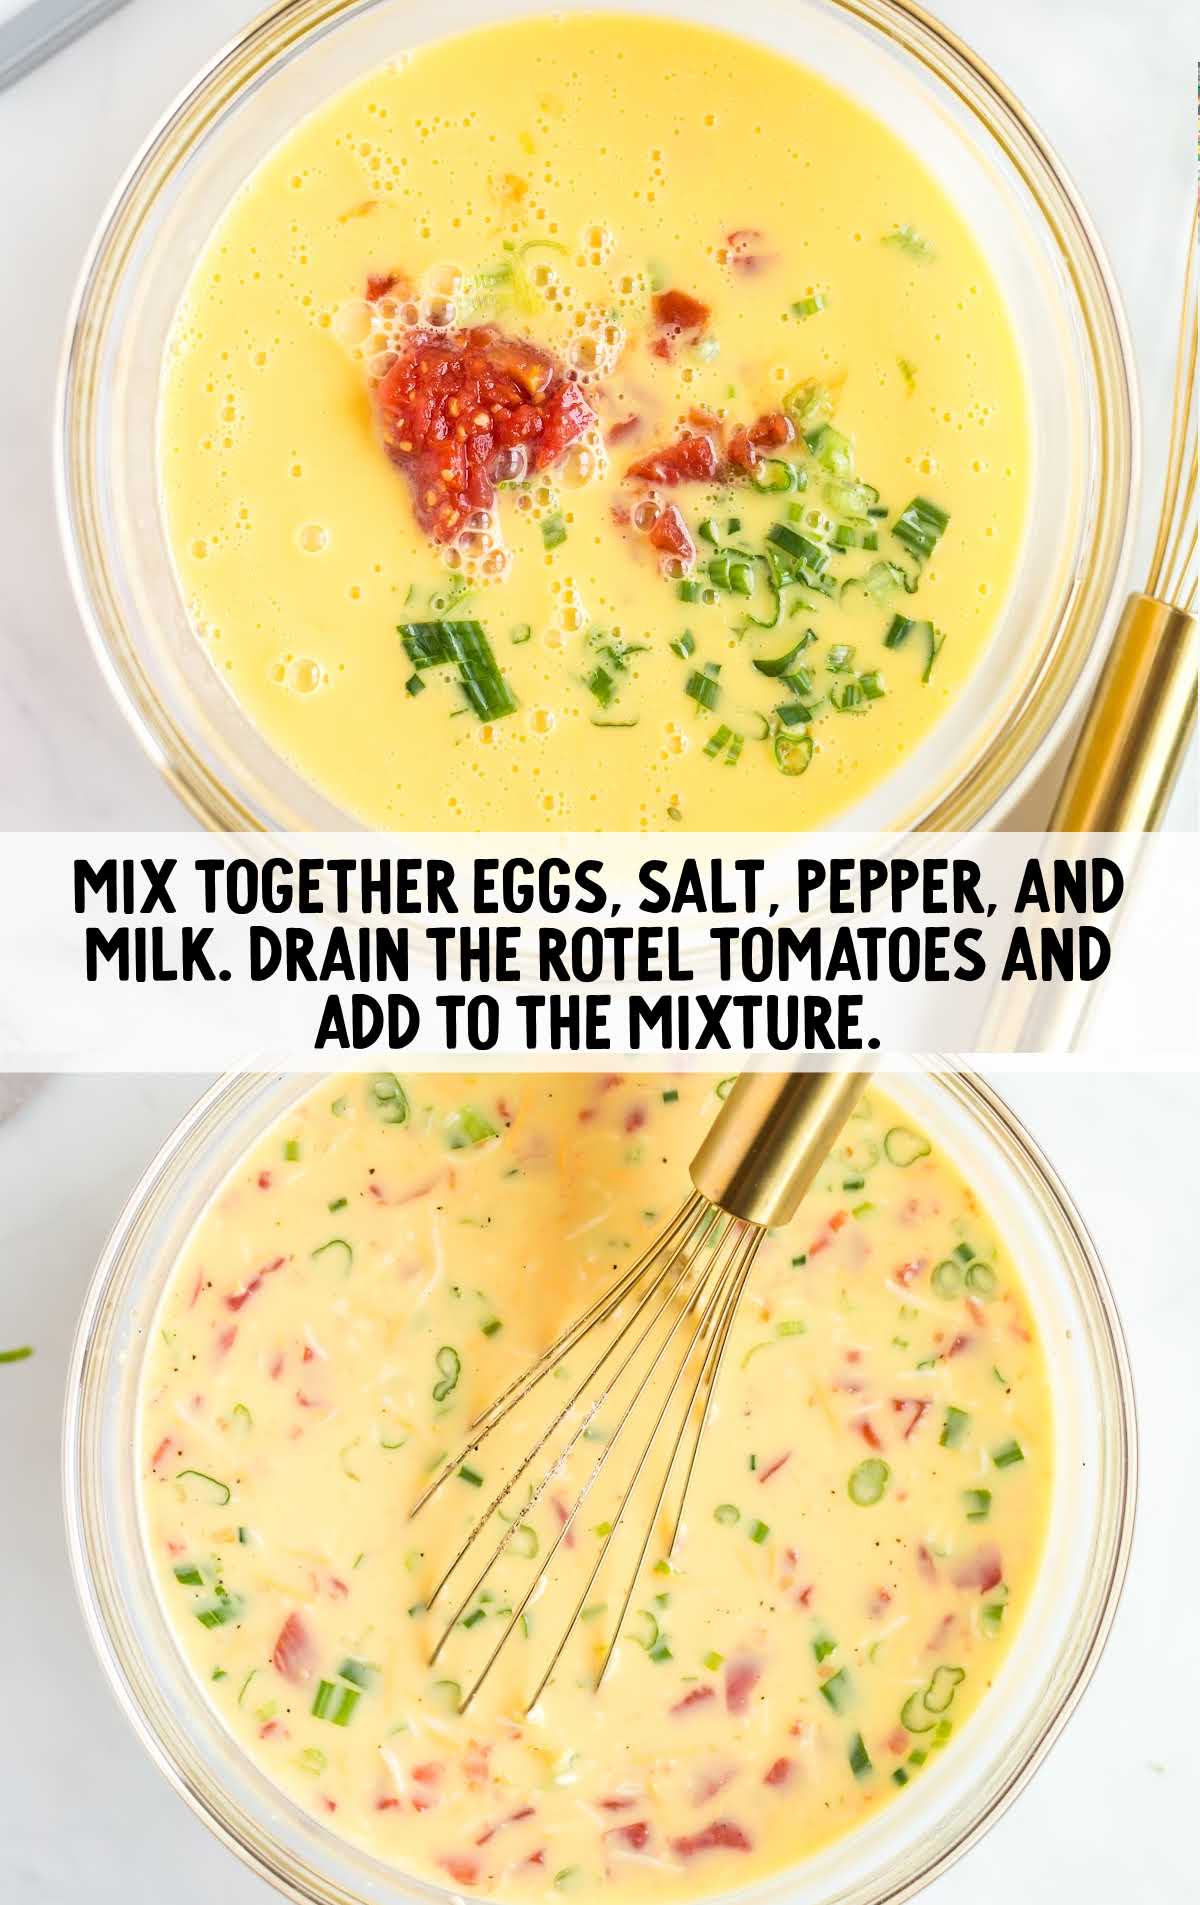 eggs, milk, tomatoes, and seasonings whisked together in a bowl